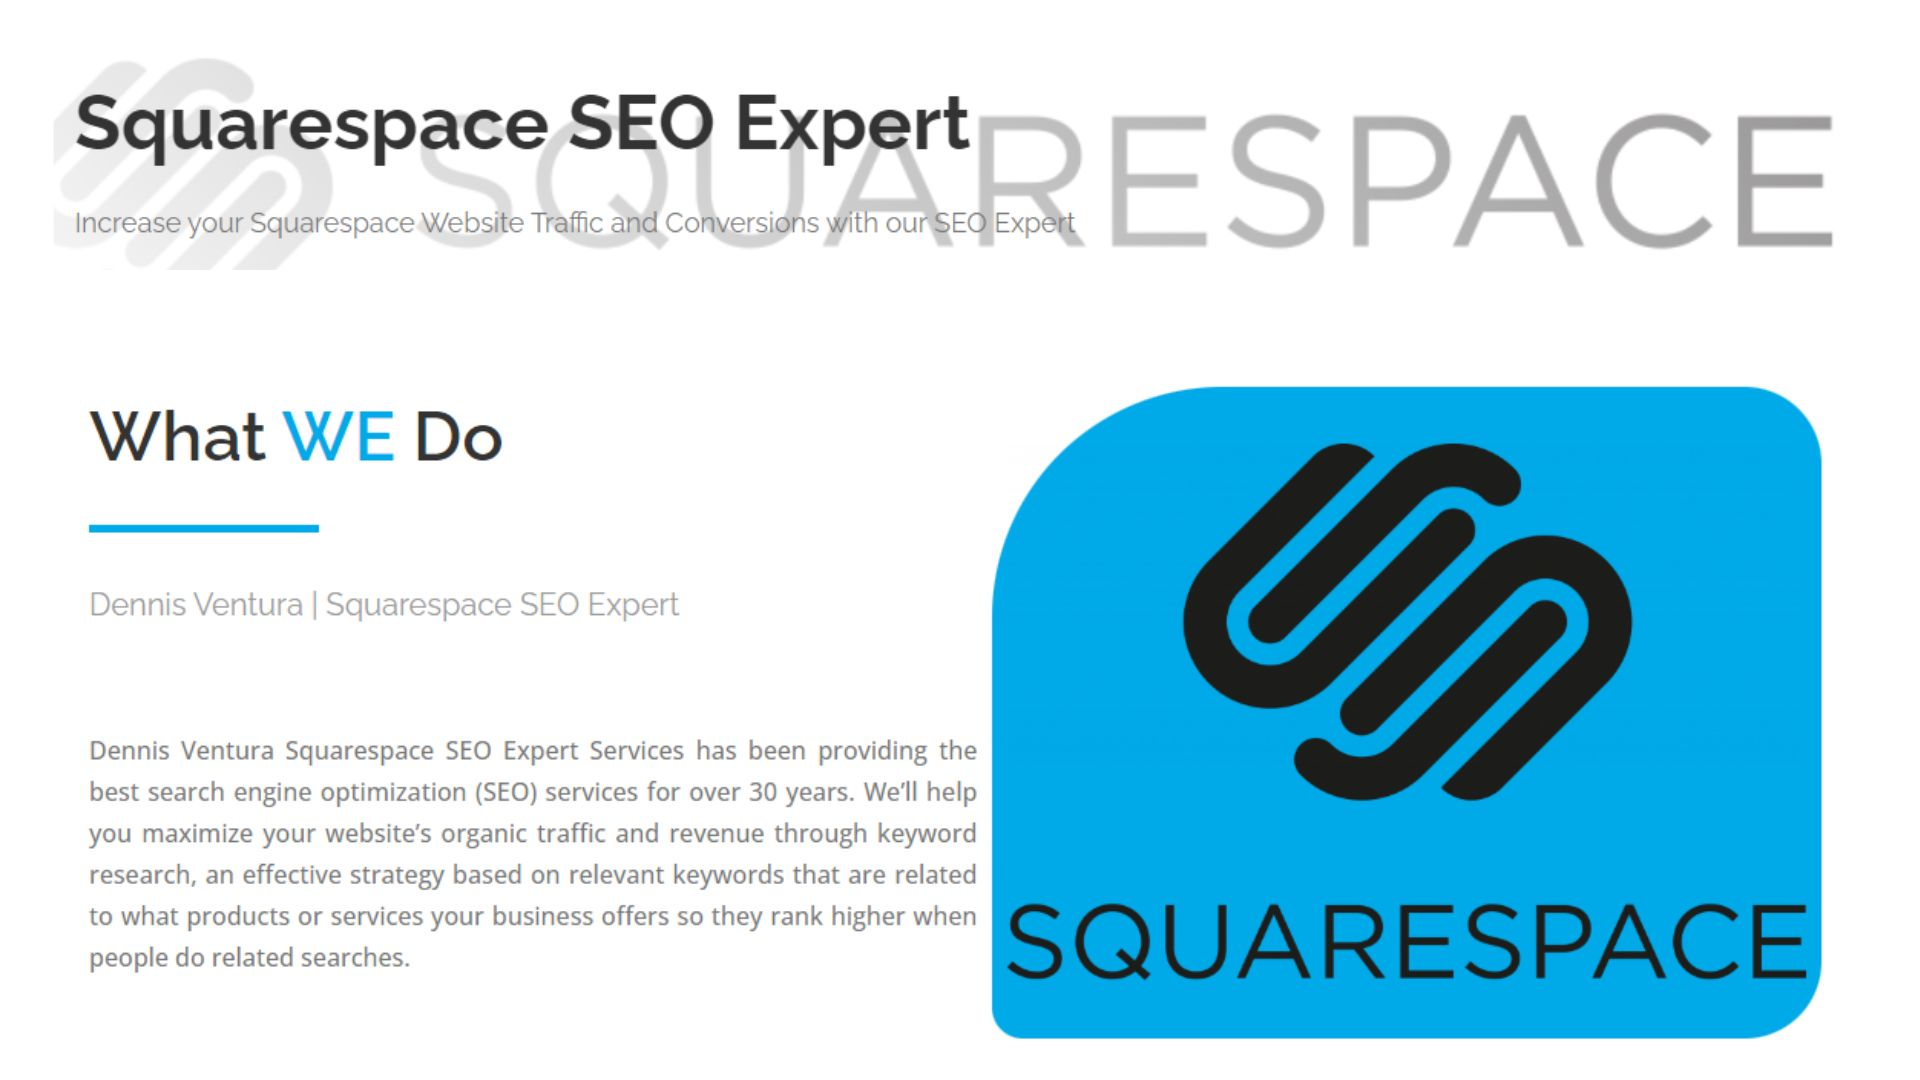 How Can Squarespace SEO Expert Help you?